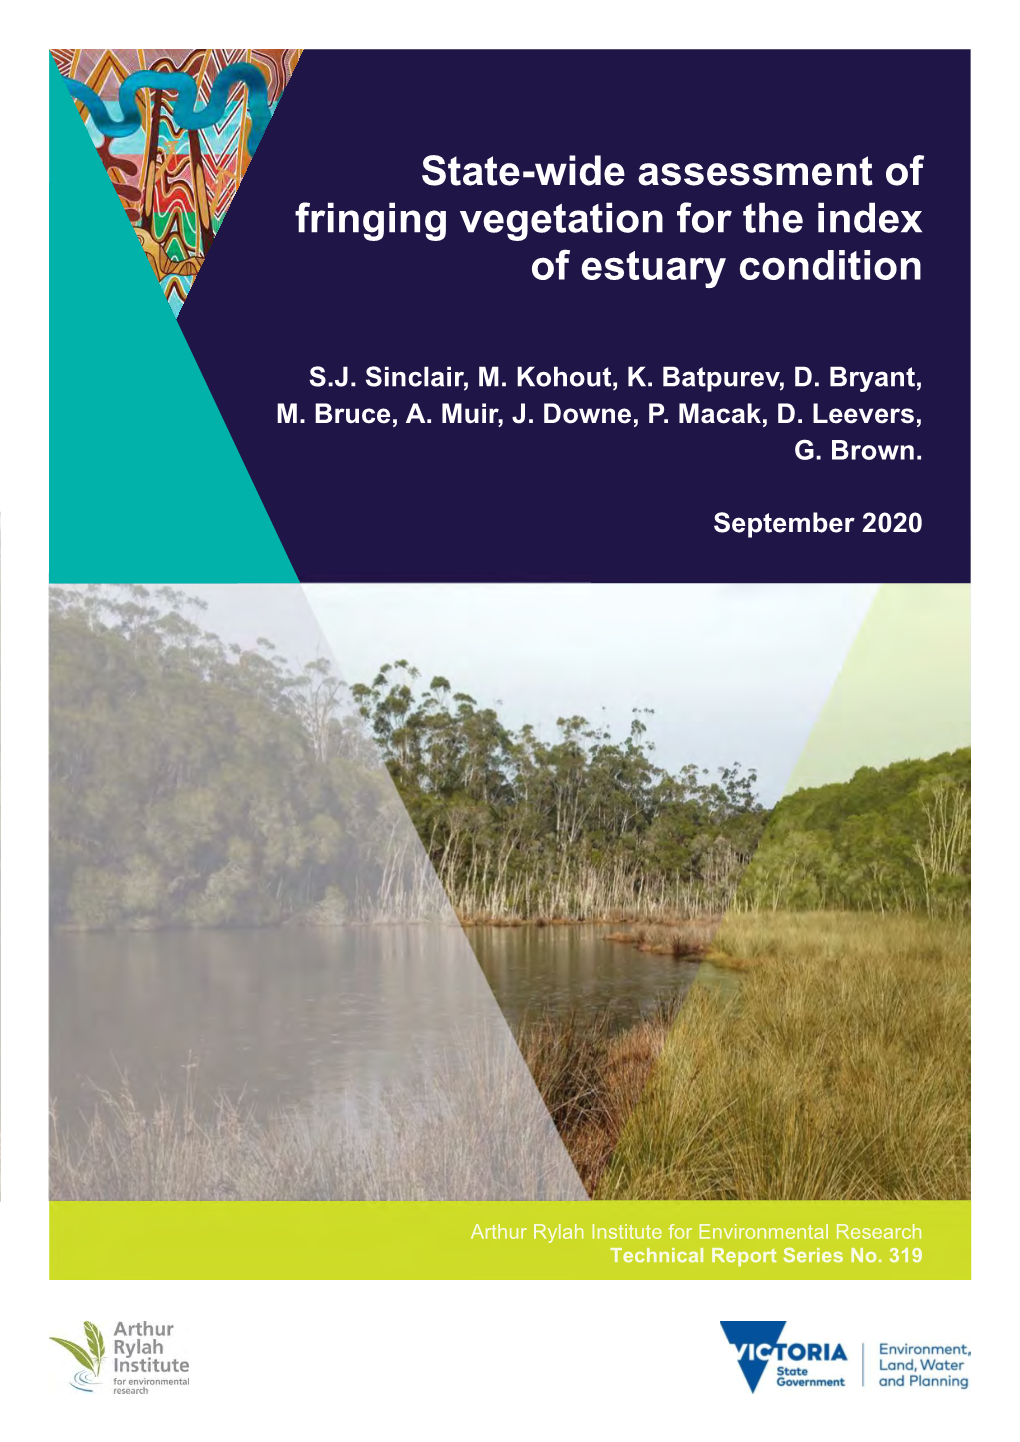 State-Wide Assessment of Fringing Vegetation for the Index of Estuary Condition